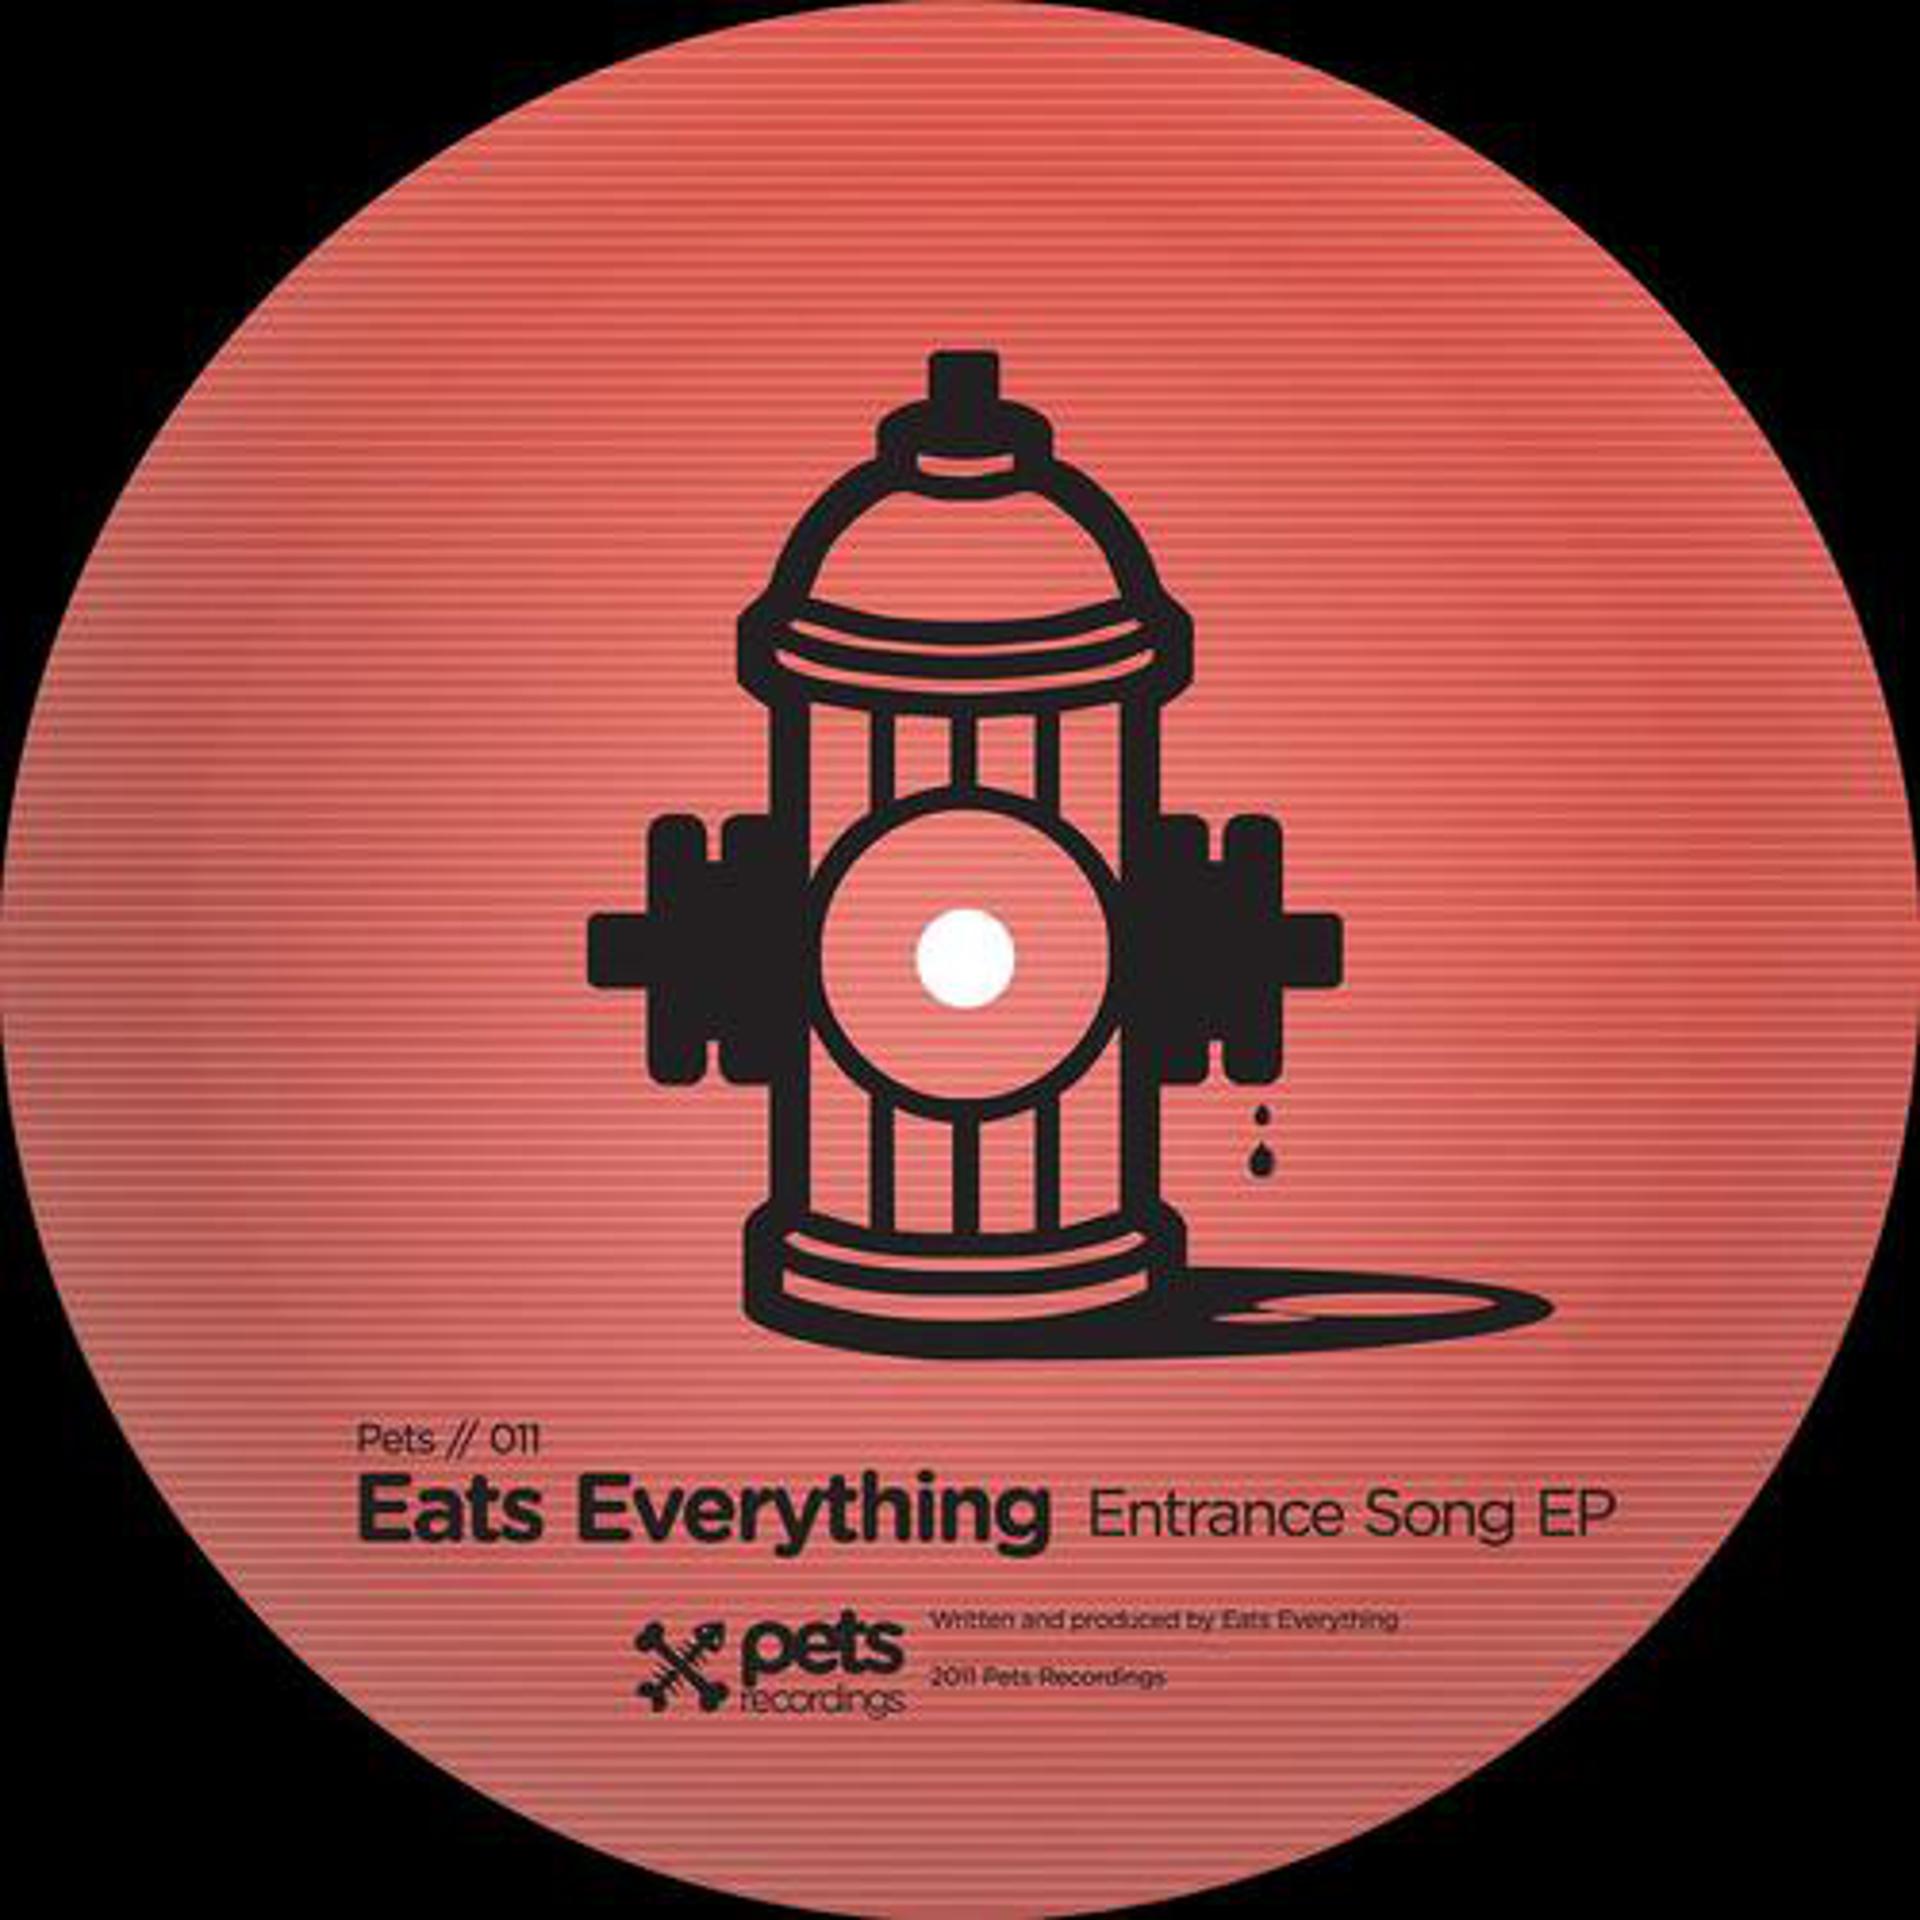 Eats everything. Pets recordings. Everything can be an album Cover шаблон. Pets Song. Everything минус